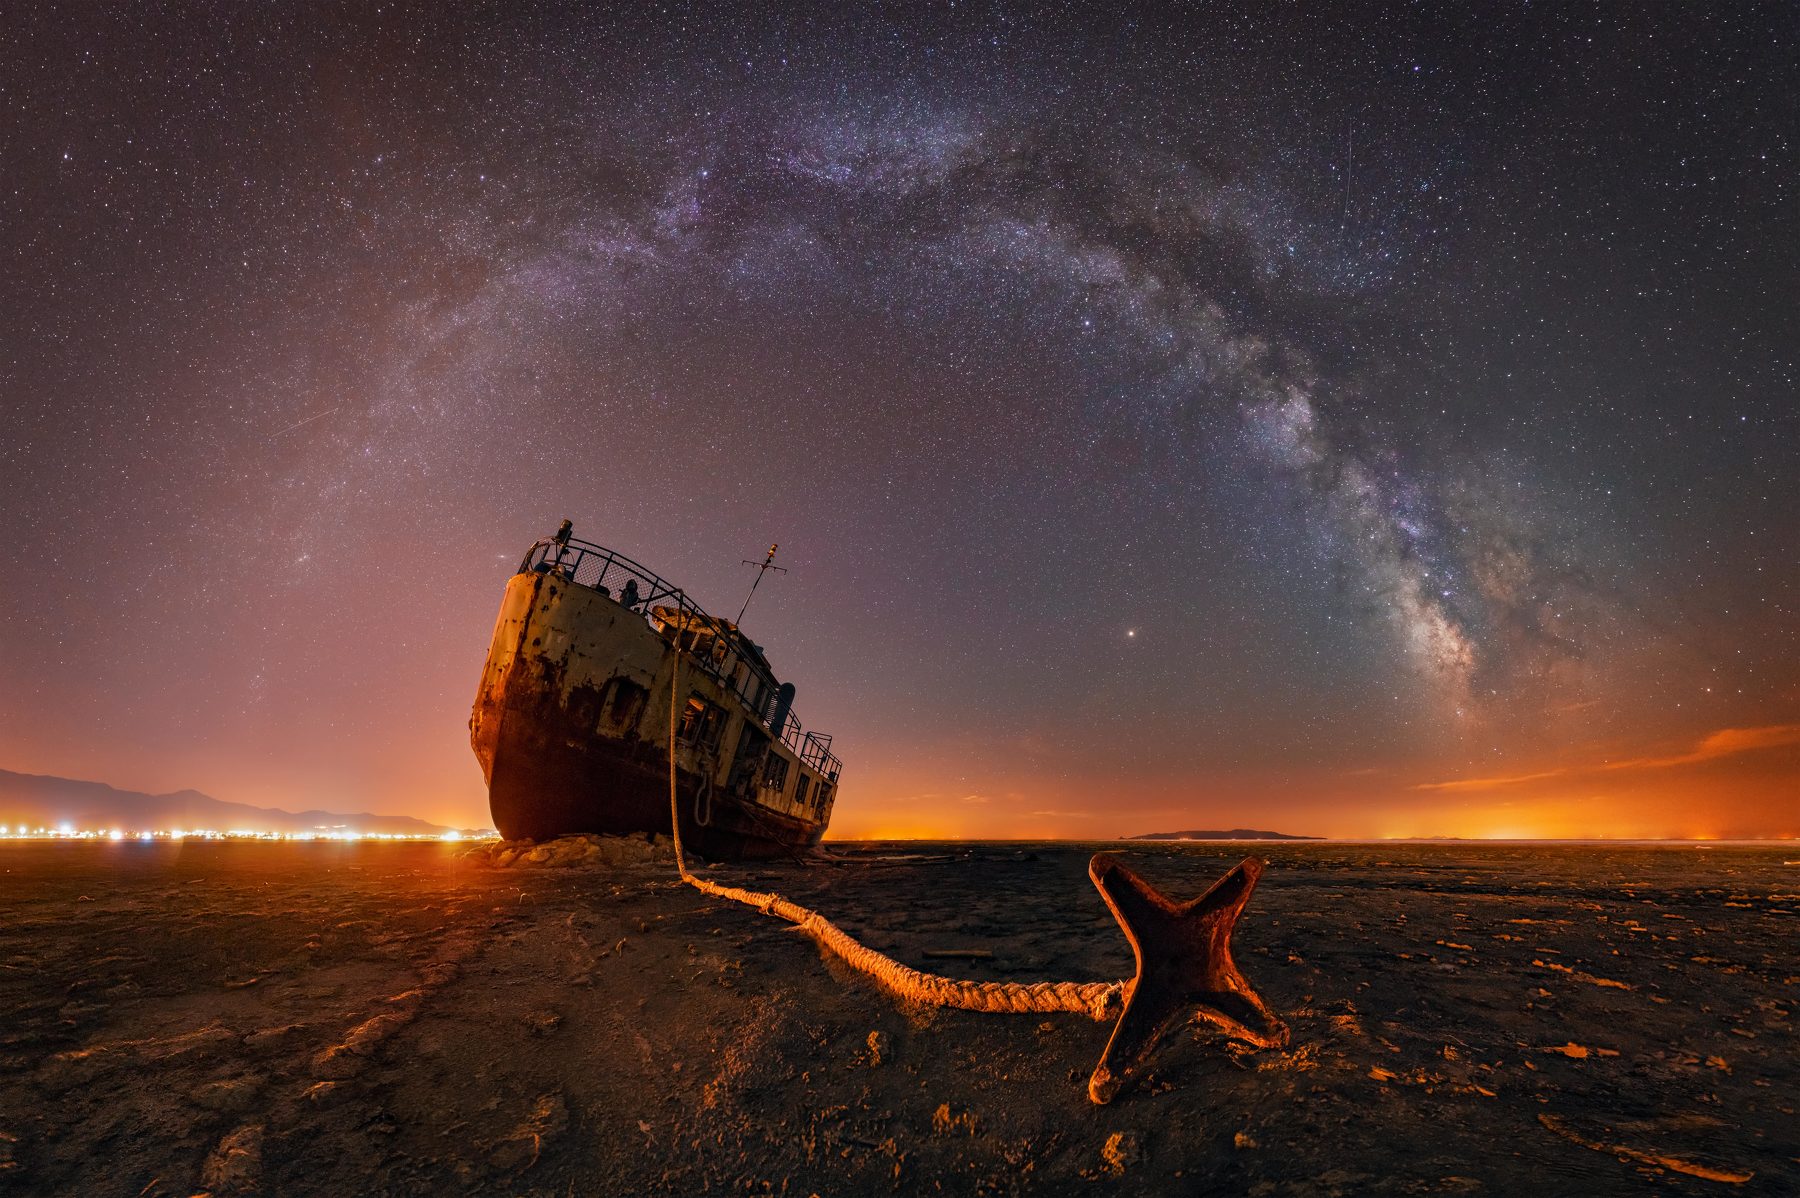 General 1800x1198 landscape photography long exposure Milky Way space sky stars nature boat horizon lights night anchors city lights starred sky shipwreck